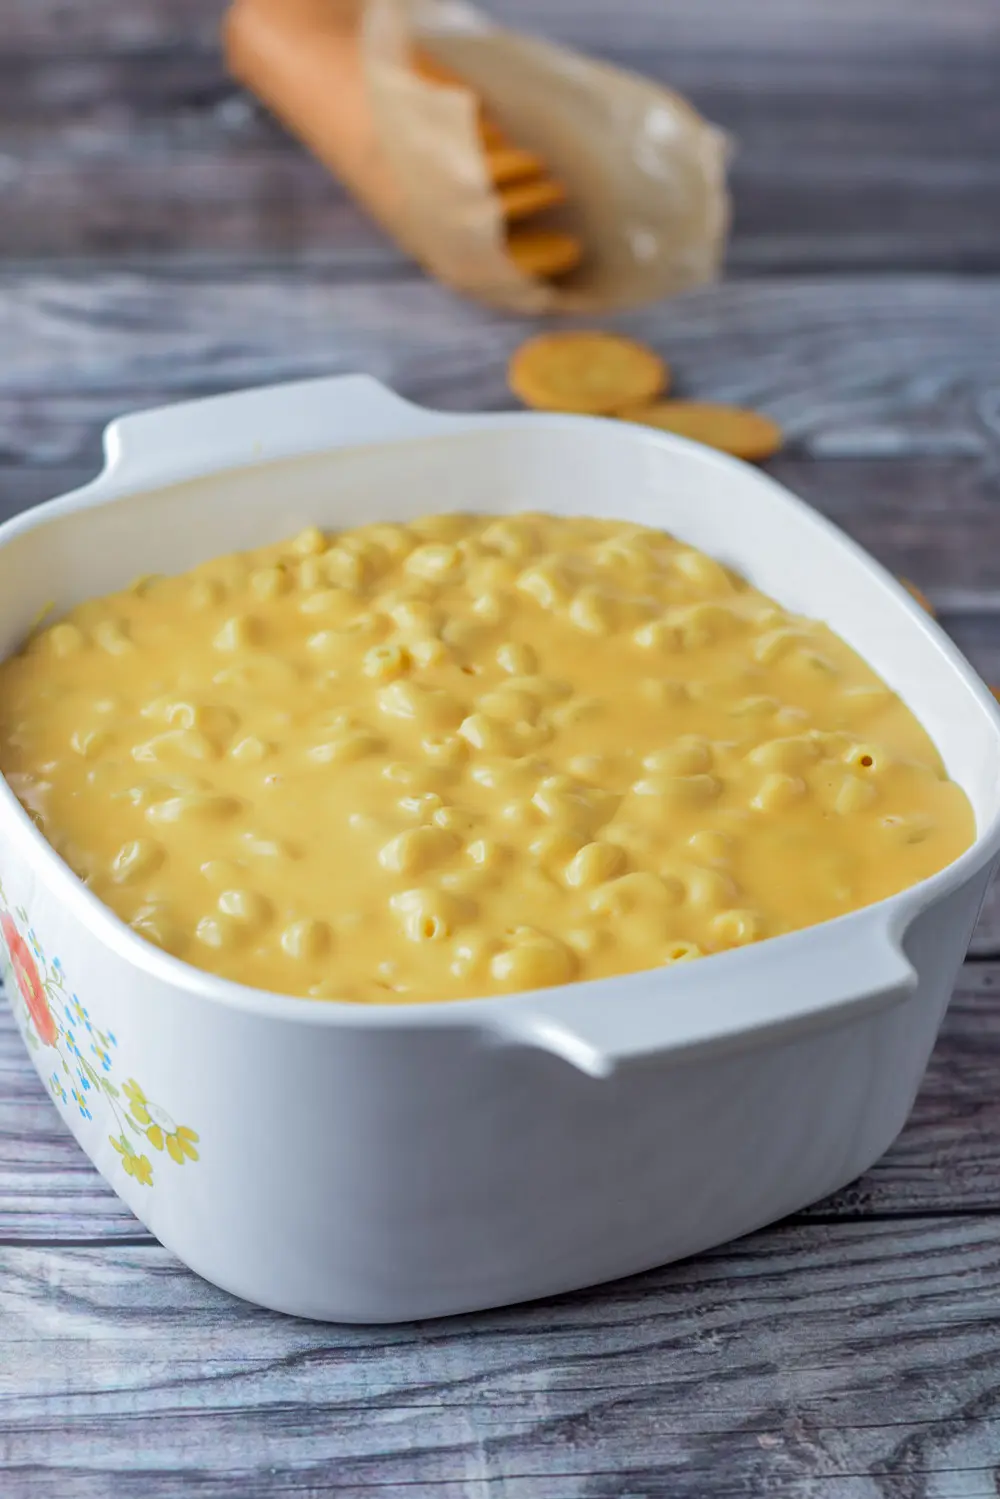 Elbow macaroni and cheese sauce in a casserole dish with some Ritz crackers in the background